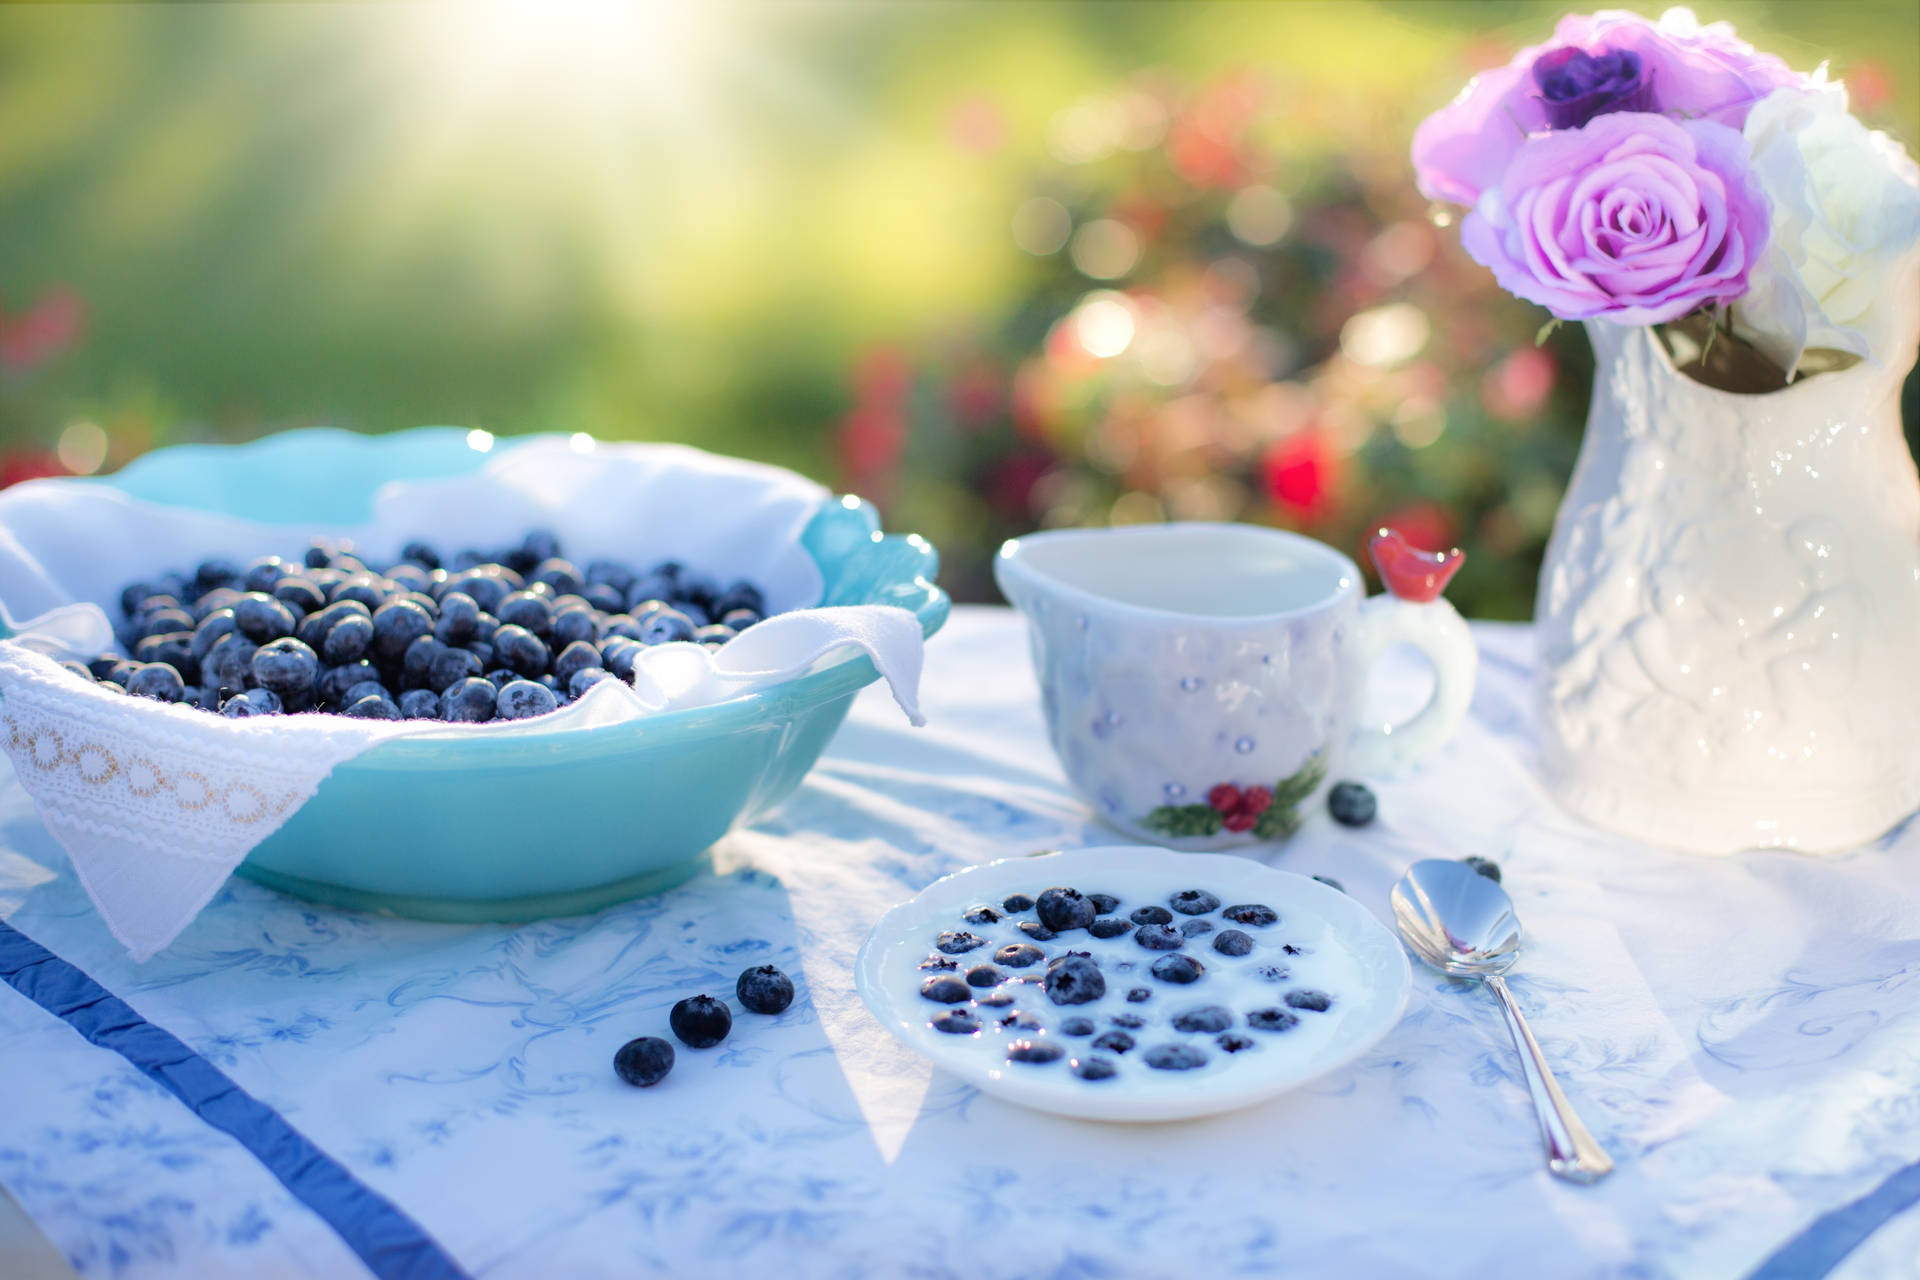 Delectable Fresh Blueberries For A Healthy Breakfast Background